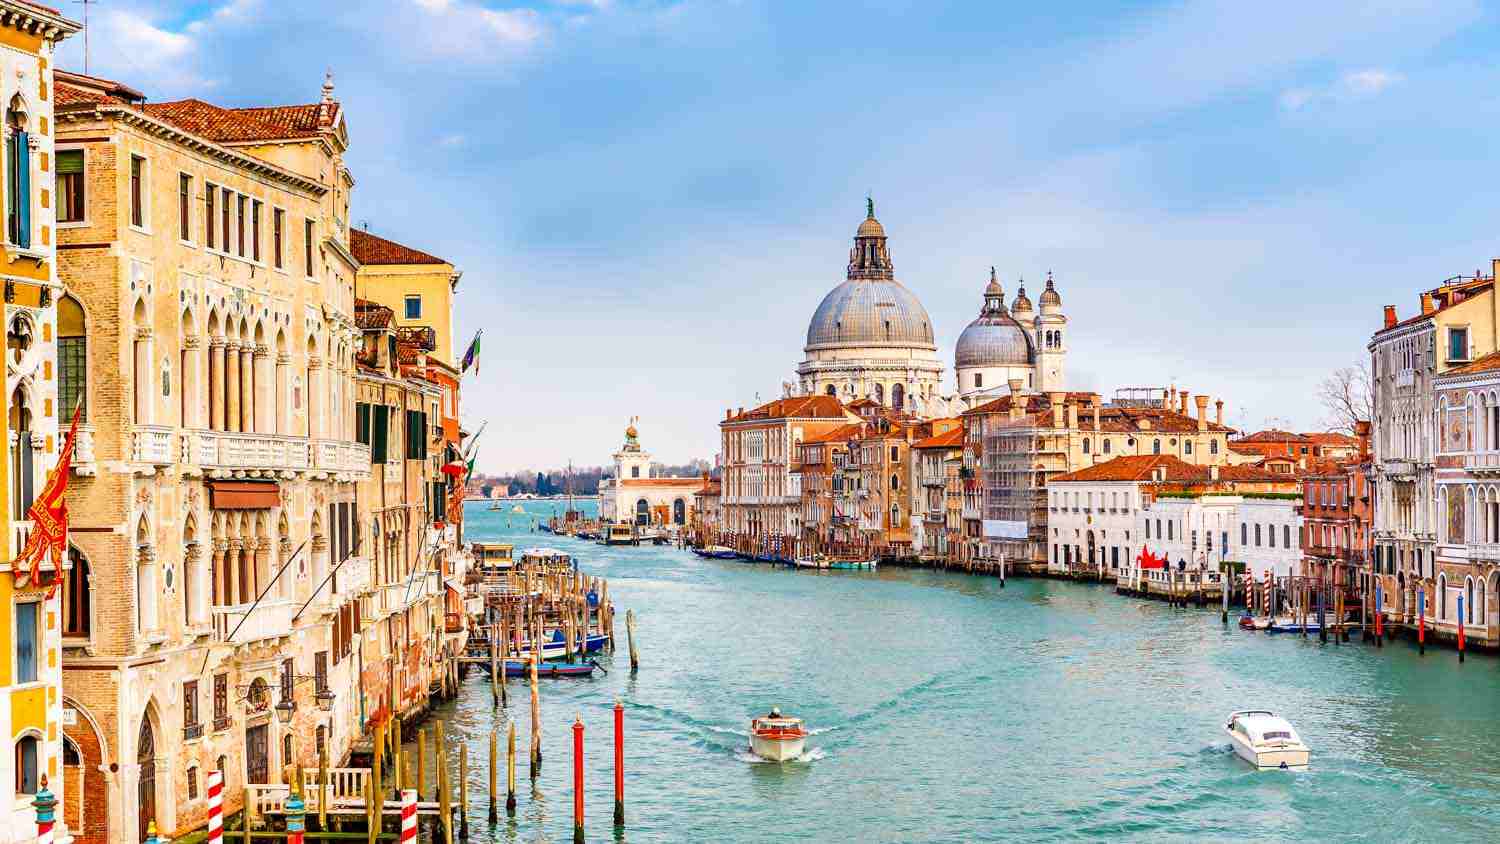 The best activities in the Grand Canal in Venice, Italy